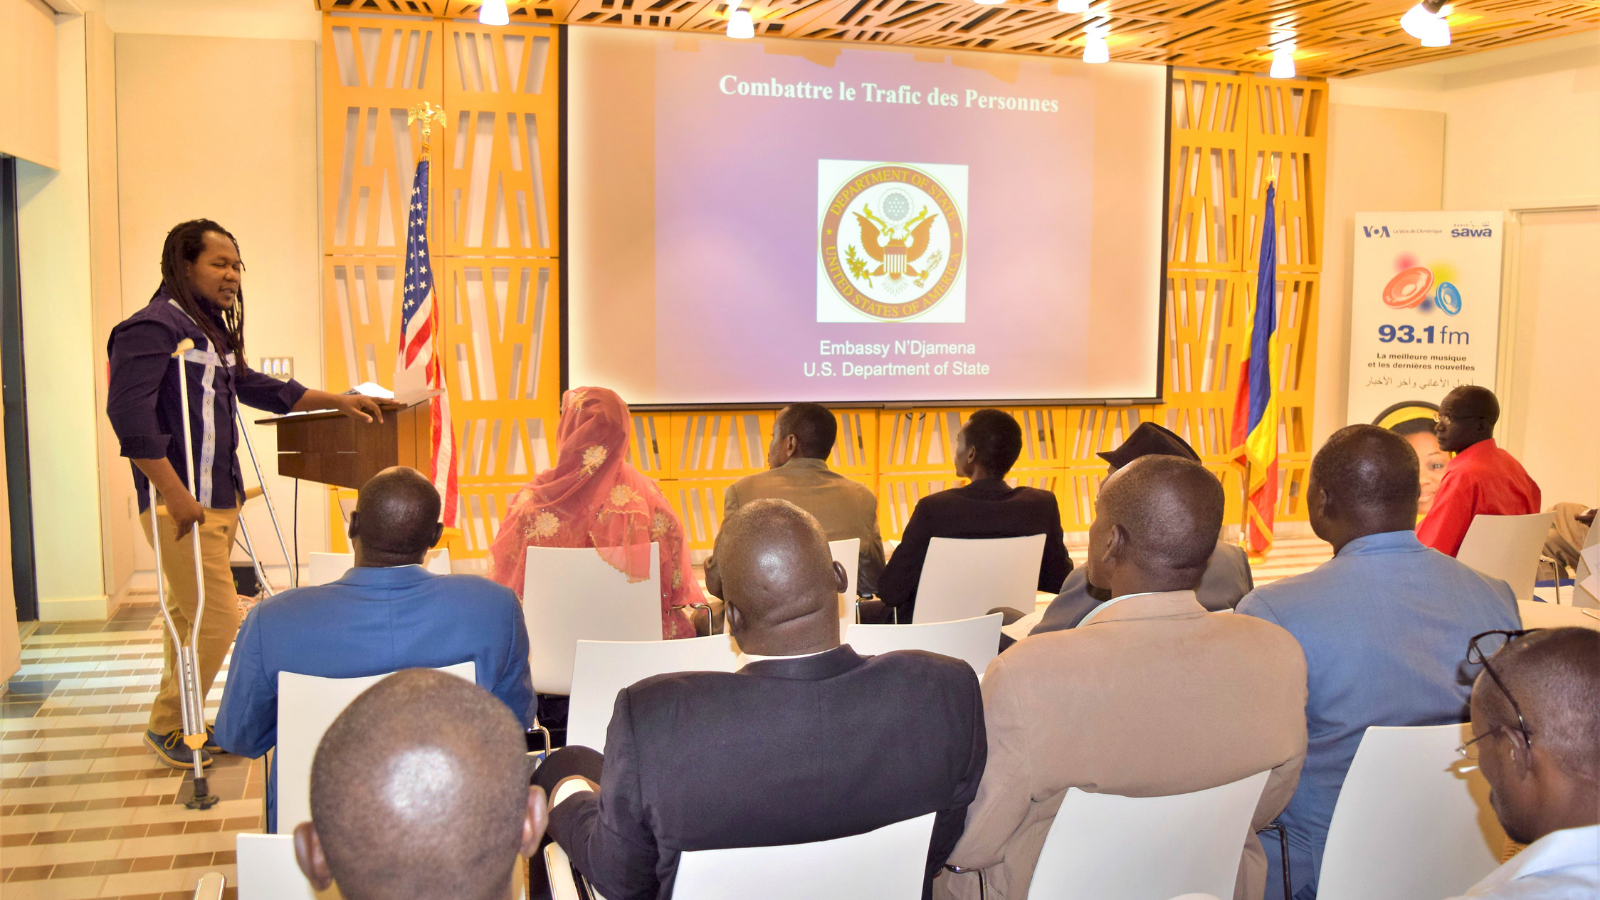 Djas Ratebaye gives a presentation on Trafficking in Persons for criminal and judicial police officers in Chad, N’Djamena. (Photo courtesy of Ali Kardas of the Public Affairs Section of U.S. Embassy N’Djamena)